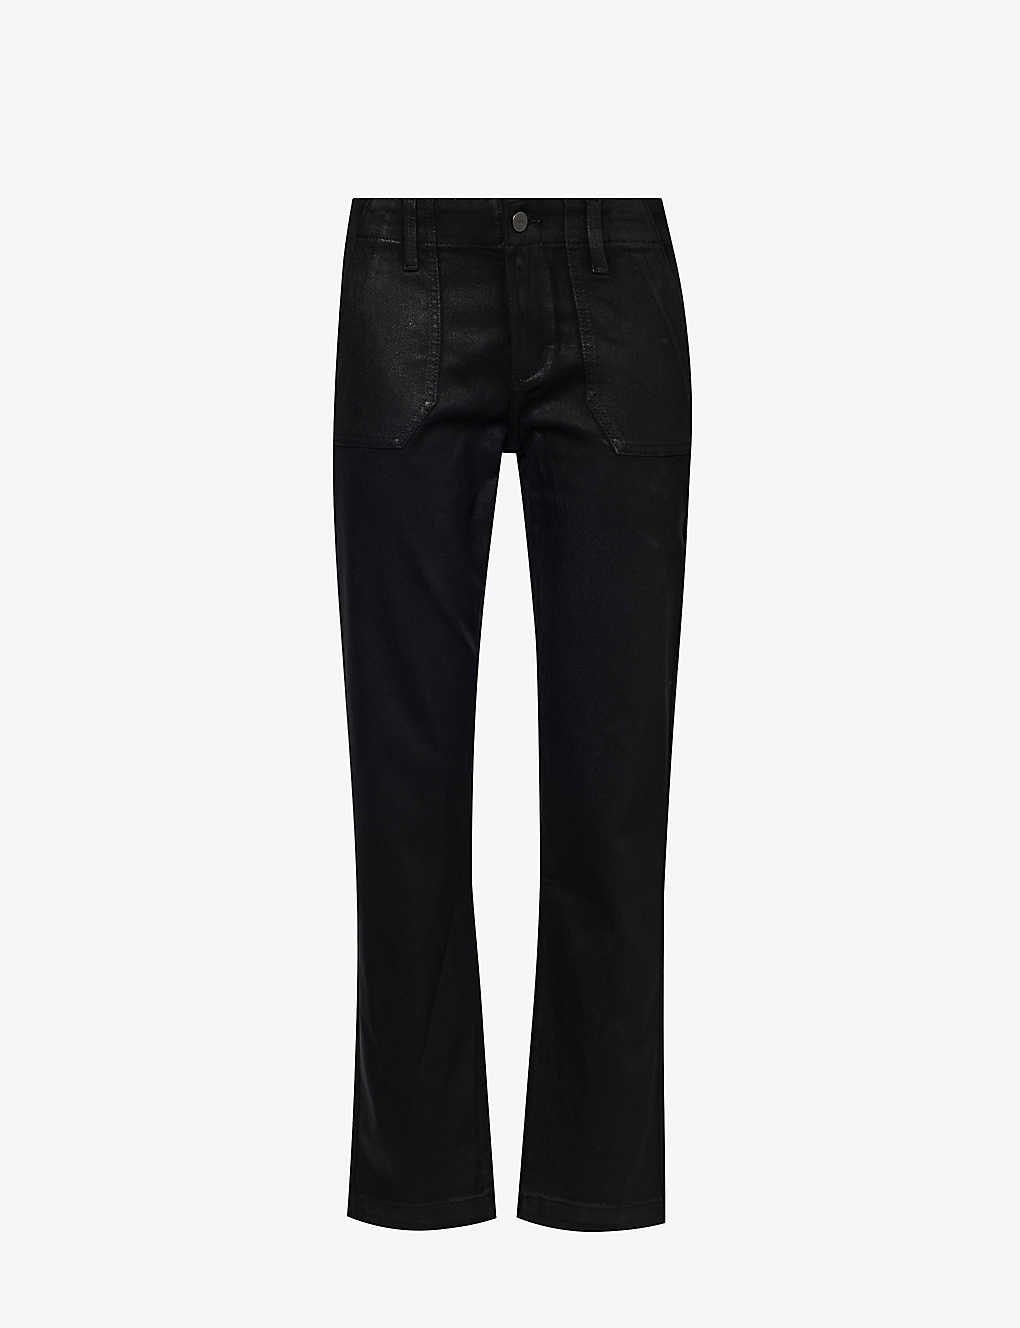 Shop Paige Women's Black Fog Luxe Coating Mayslie Straight-leg Mid-rise Stretch Cotton-blend Trousers